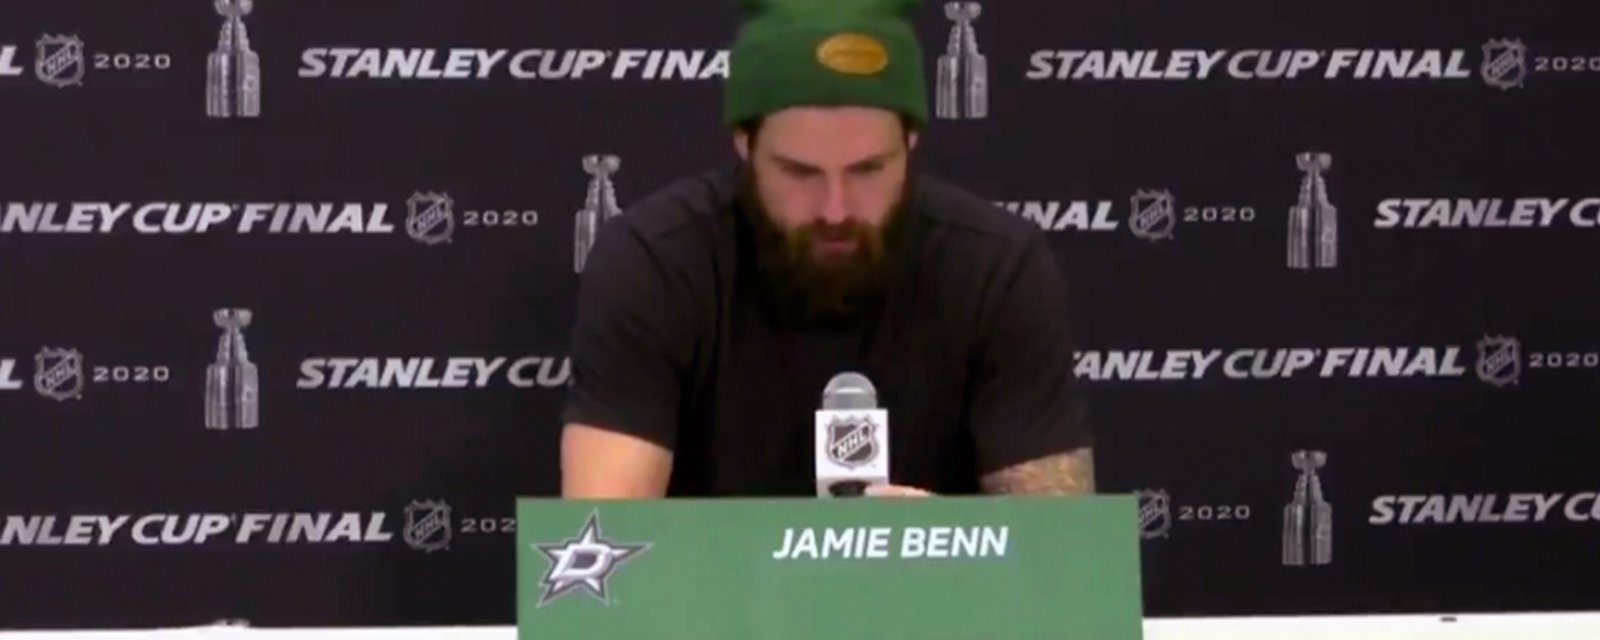 Jamie Benn breaks down in what might be the saddest press conference of all time